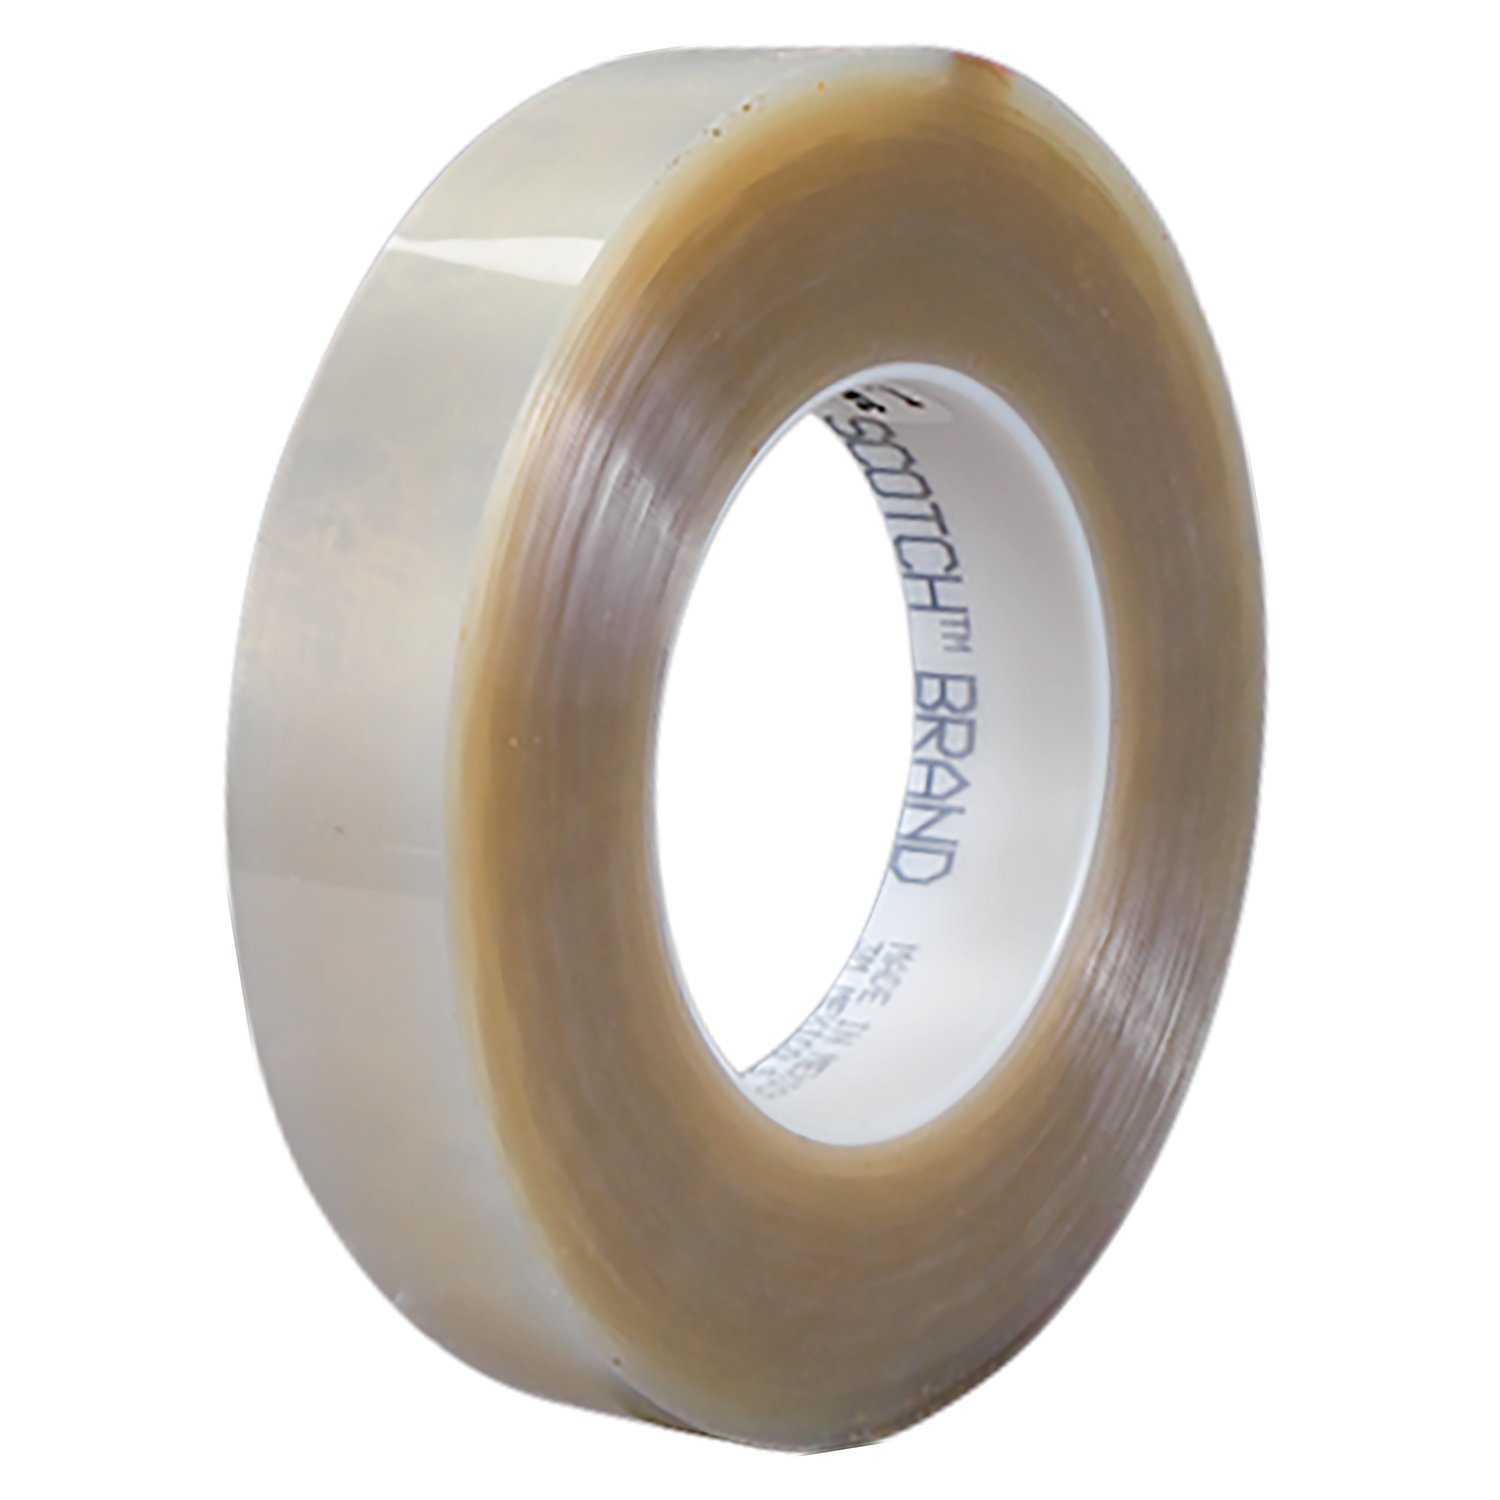 7010048706 - 3M Polyester Tape 8412, Transparent, 3 in x 72 yd, 6.3 mil, 12 rolls per case